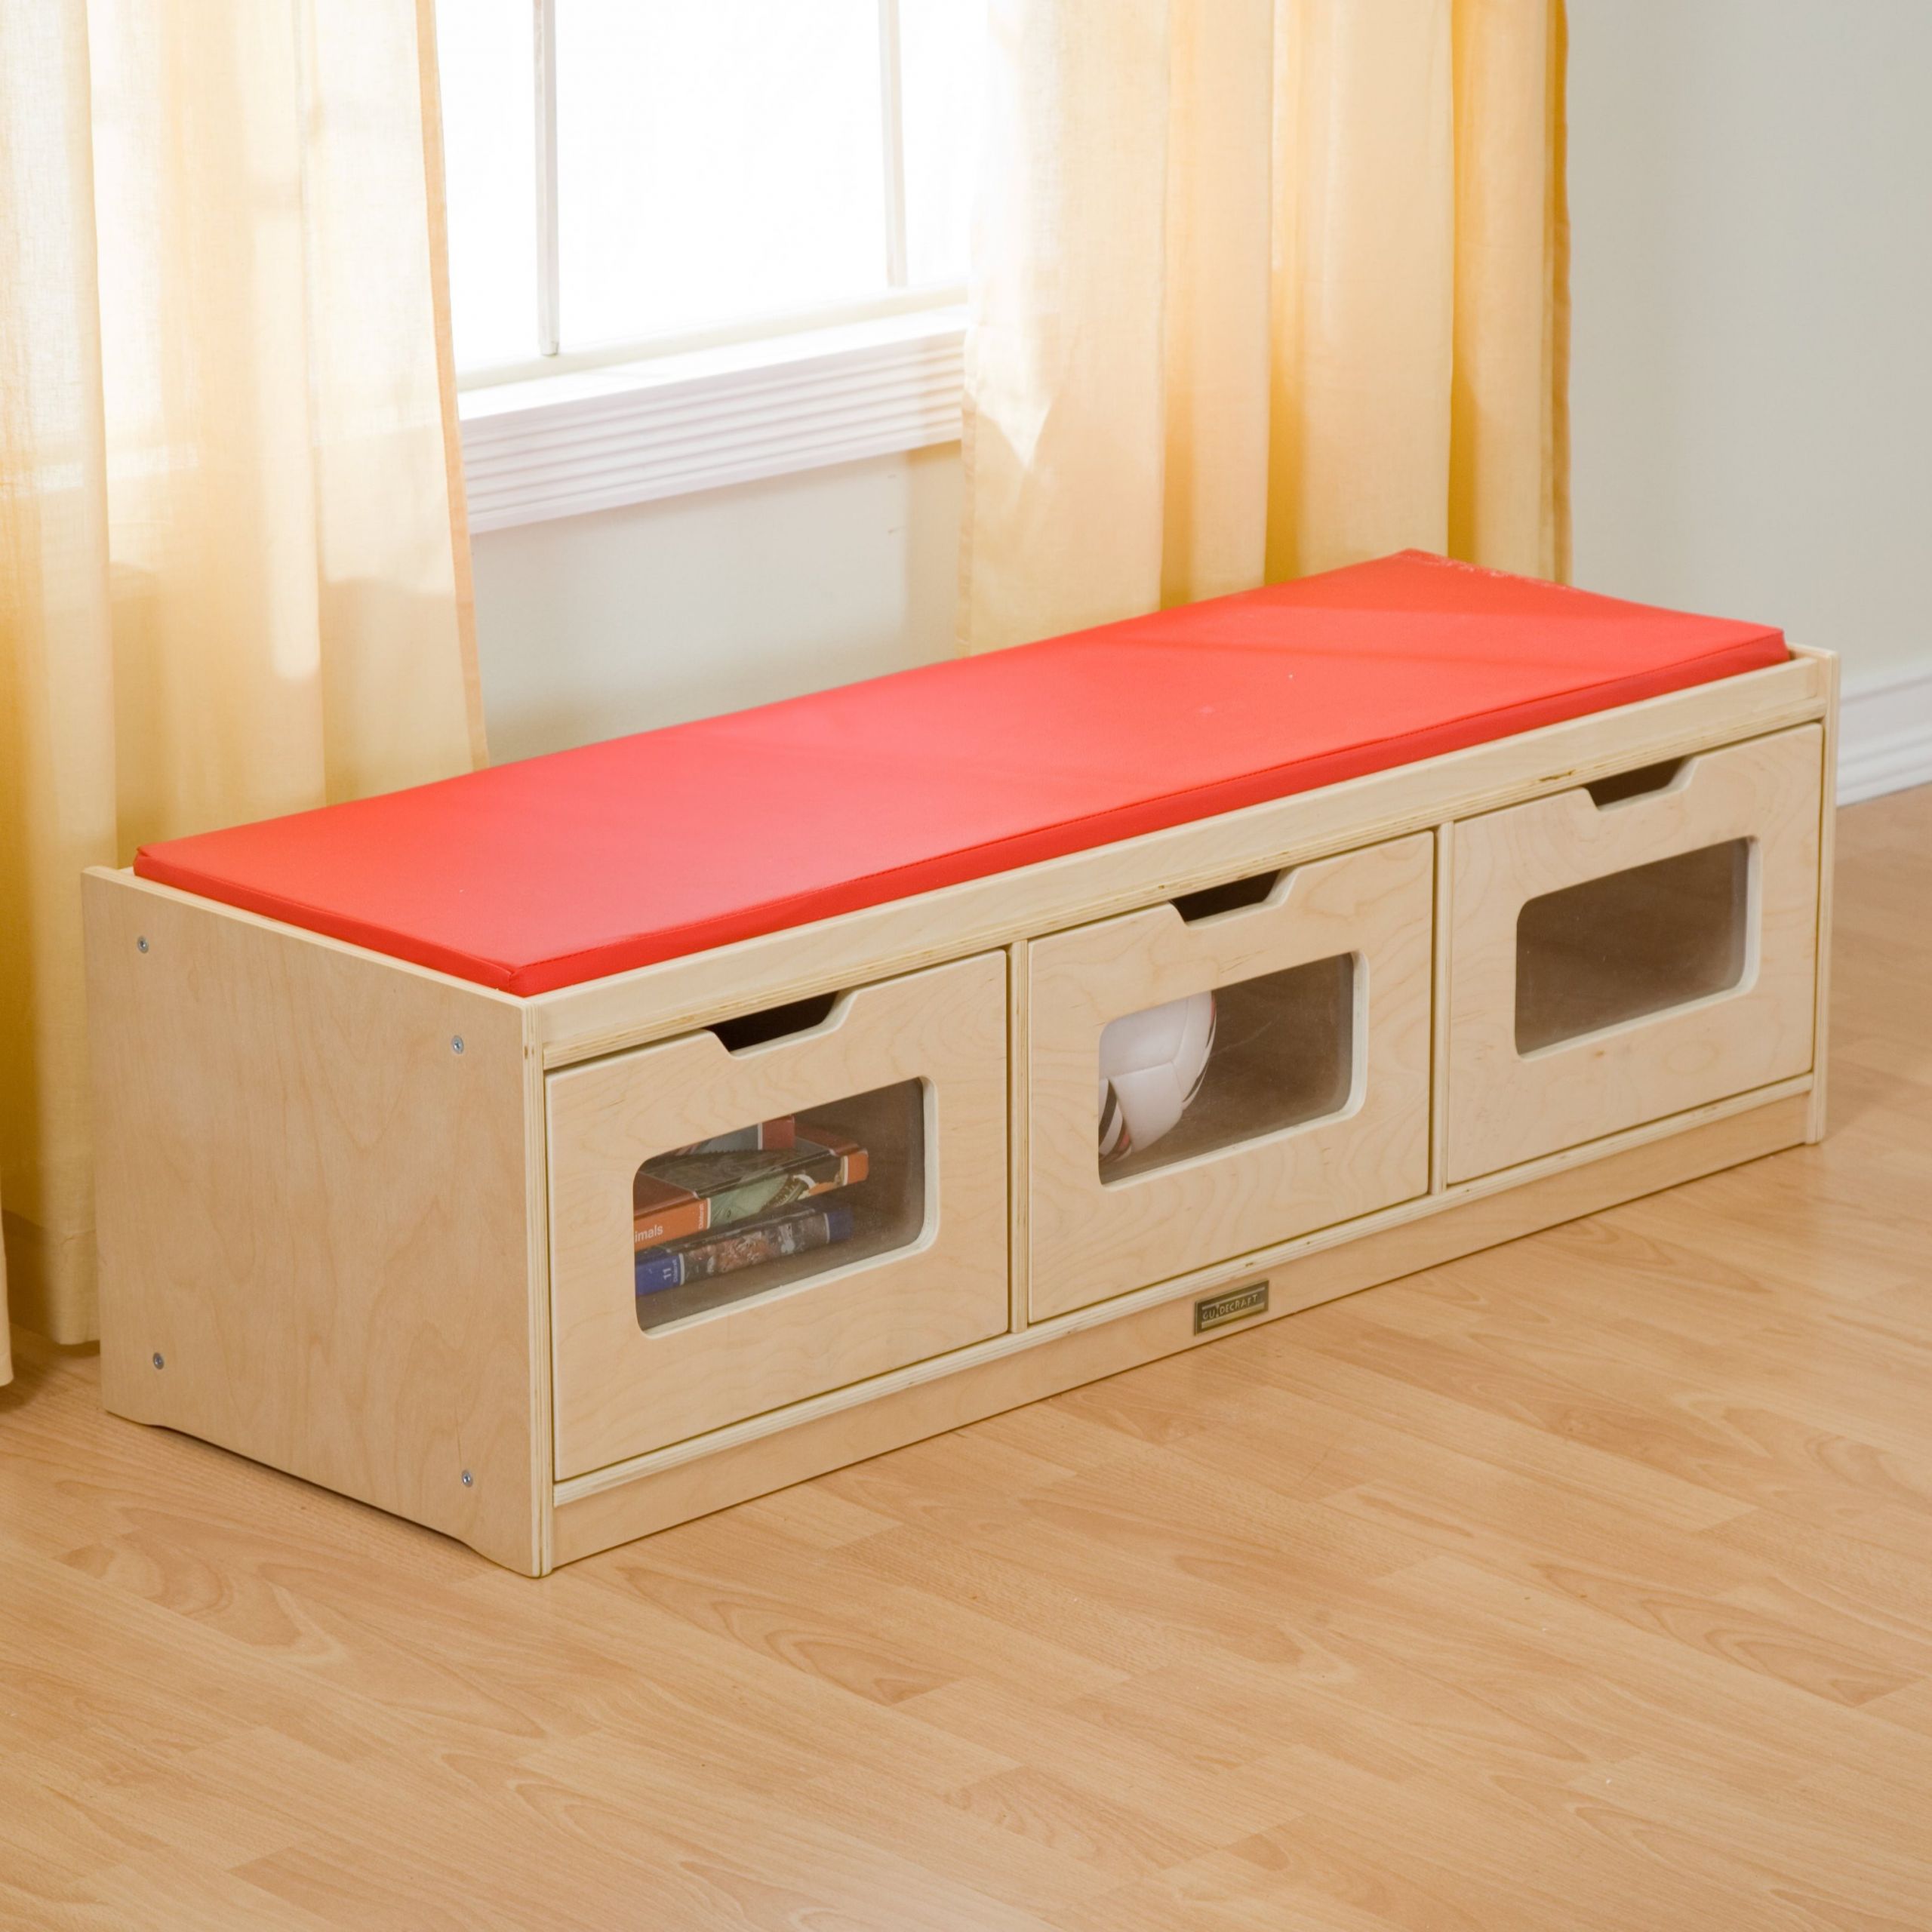 Kids Bench With Storage
 Long Bench With Storage – HomesFeed